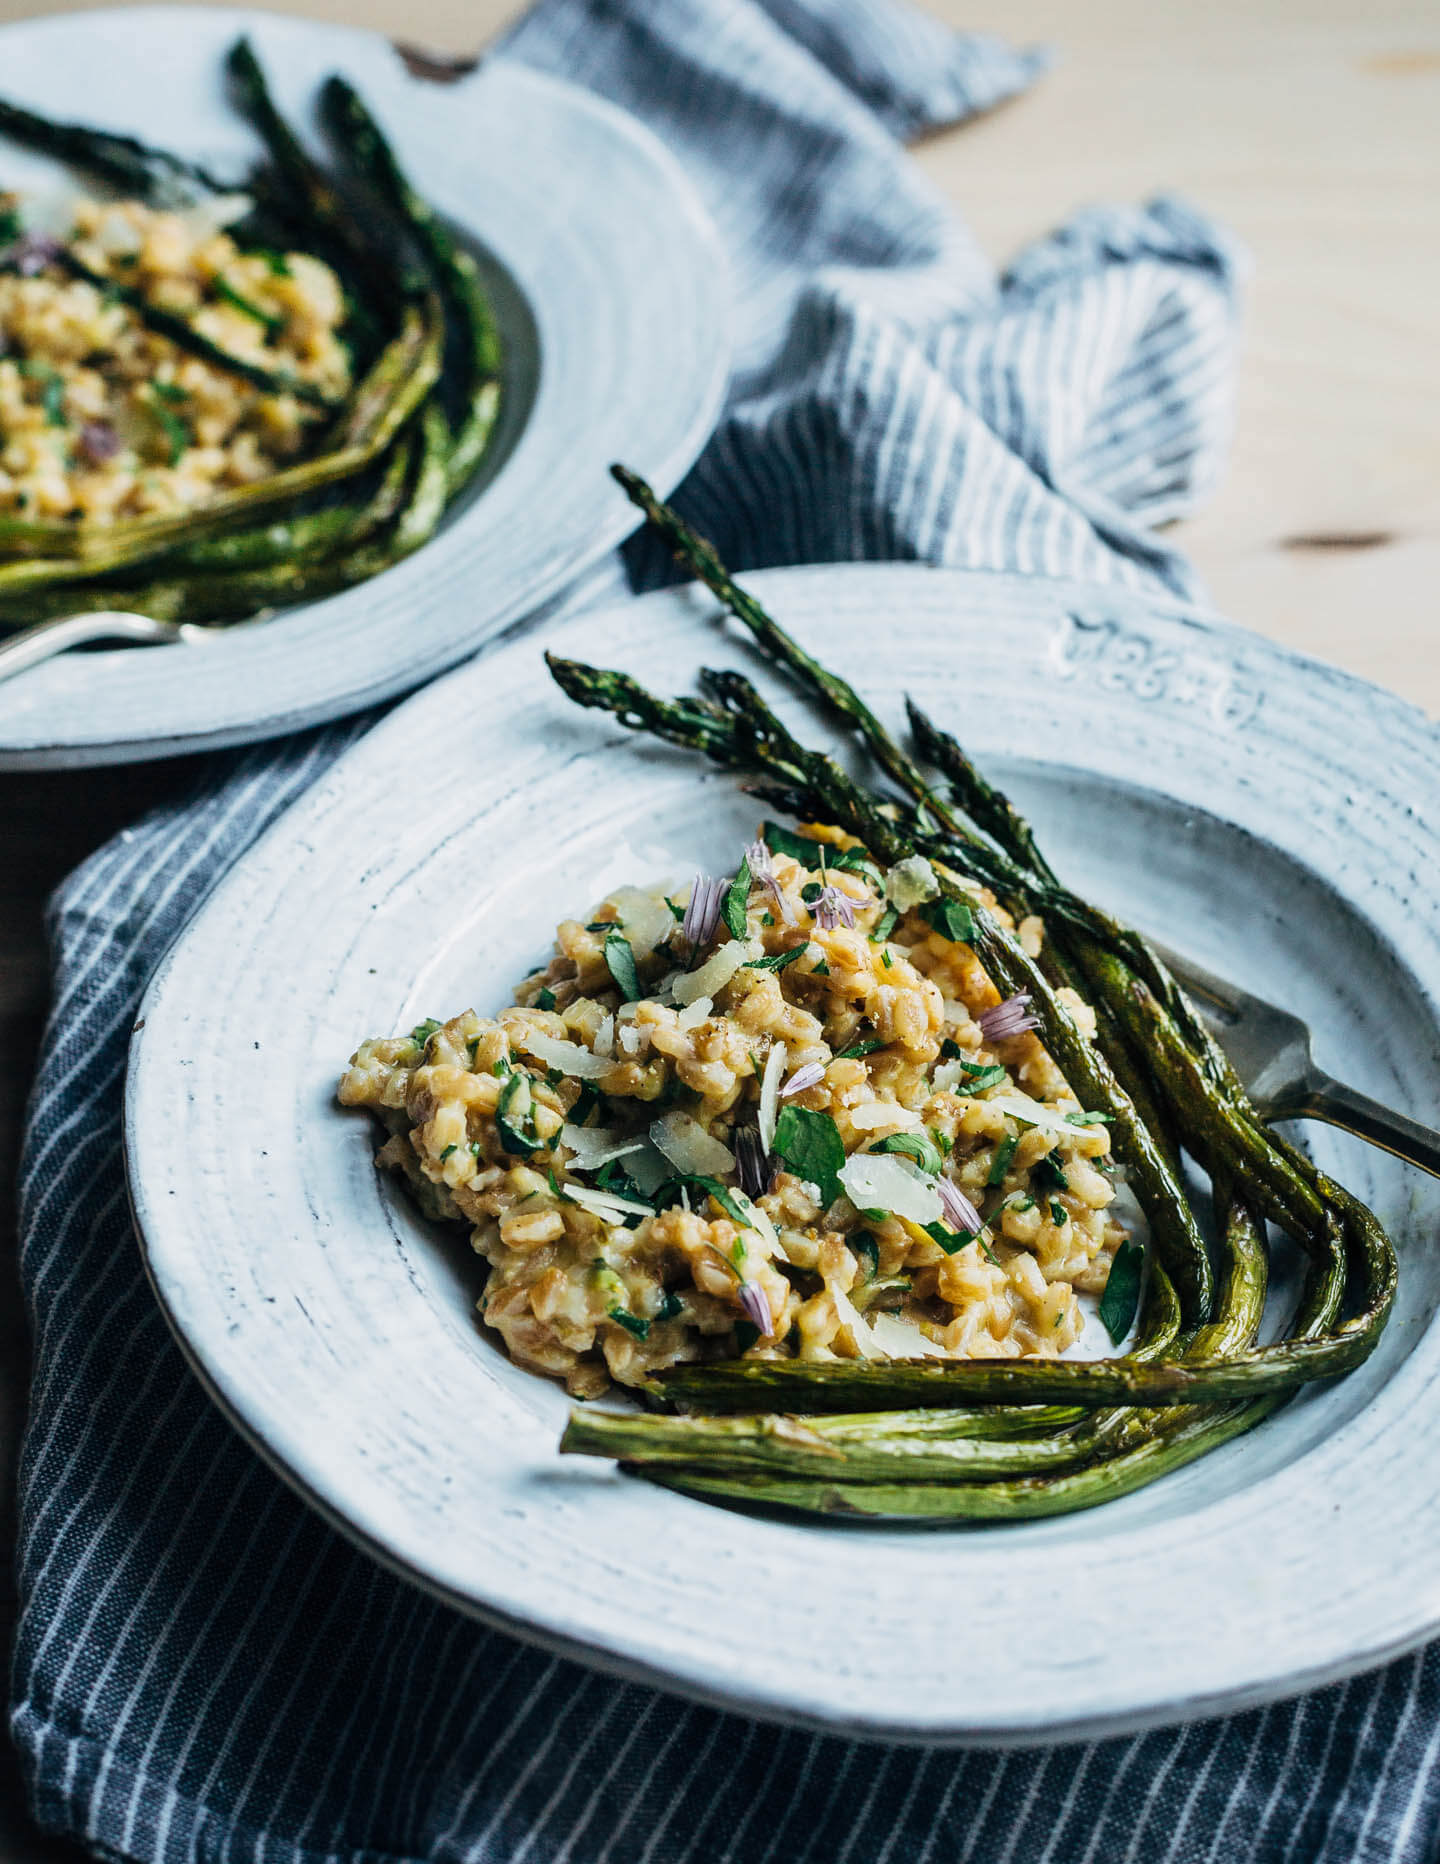 Creamy farro risotto (aka farrotto) with all the best spring things like ramps, young garlic, chives, and roasted asparagus. 